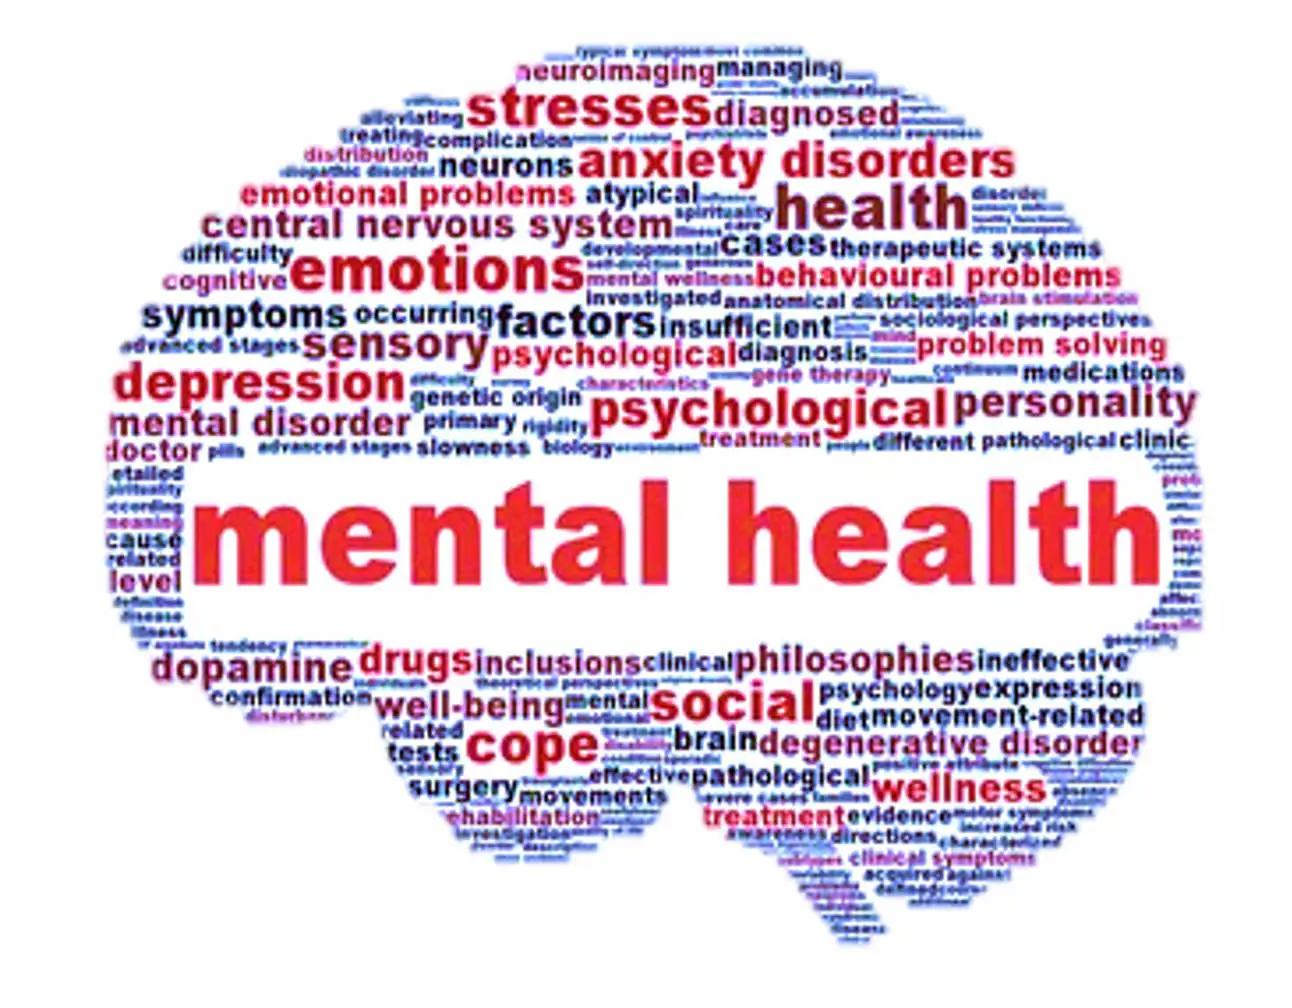 physical mental and emotional health needs of marginalised groups